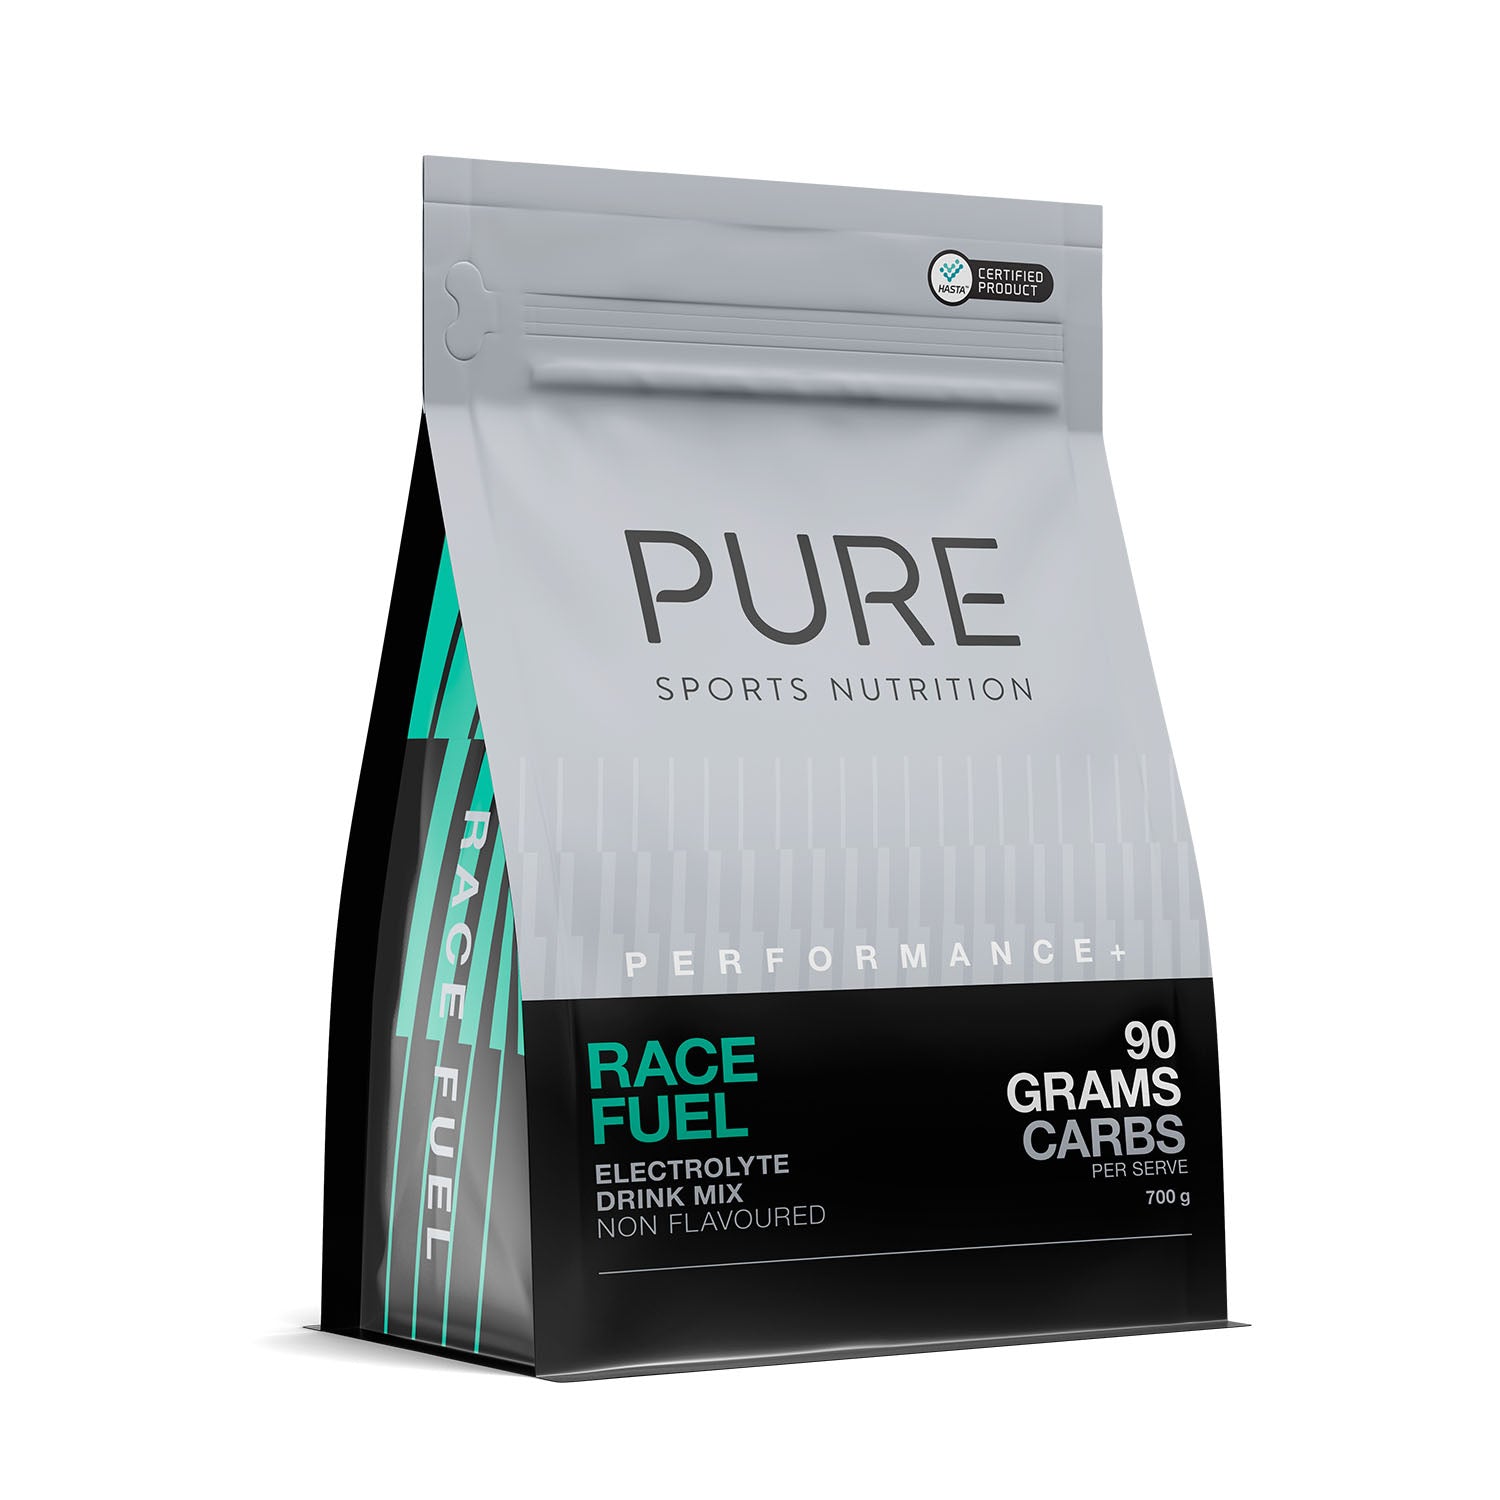 PURE PERFORMANCE + RACE FUEL 700G